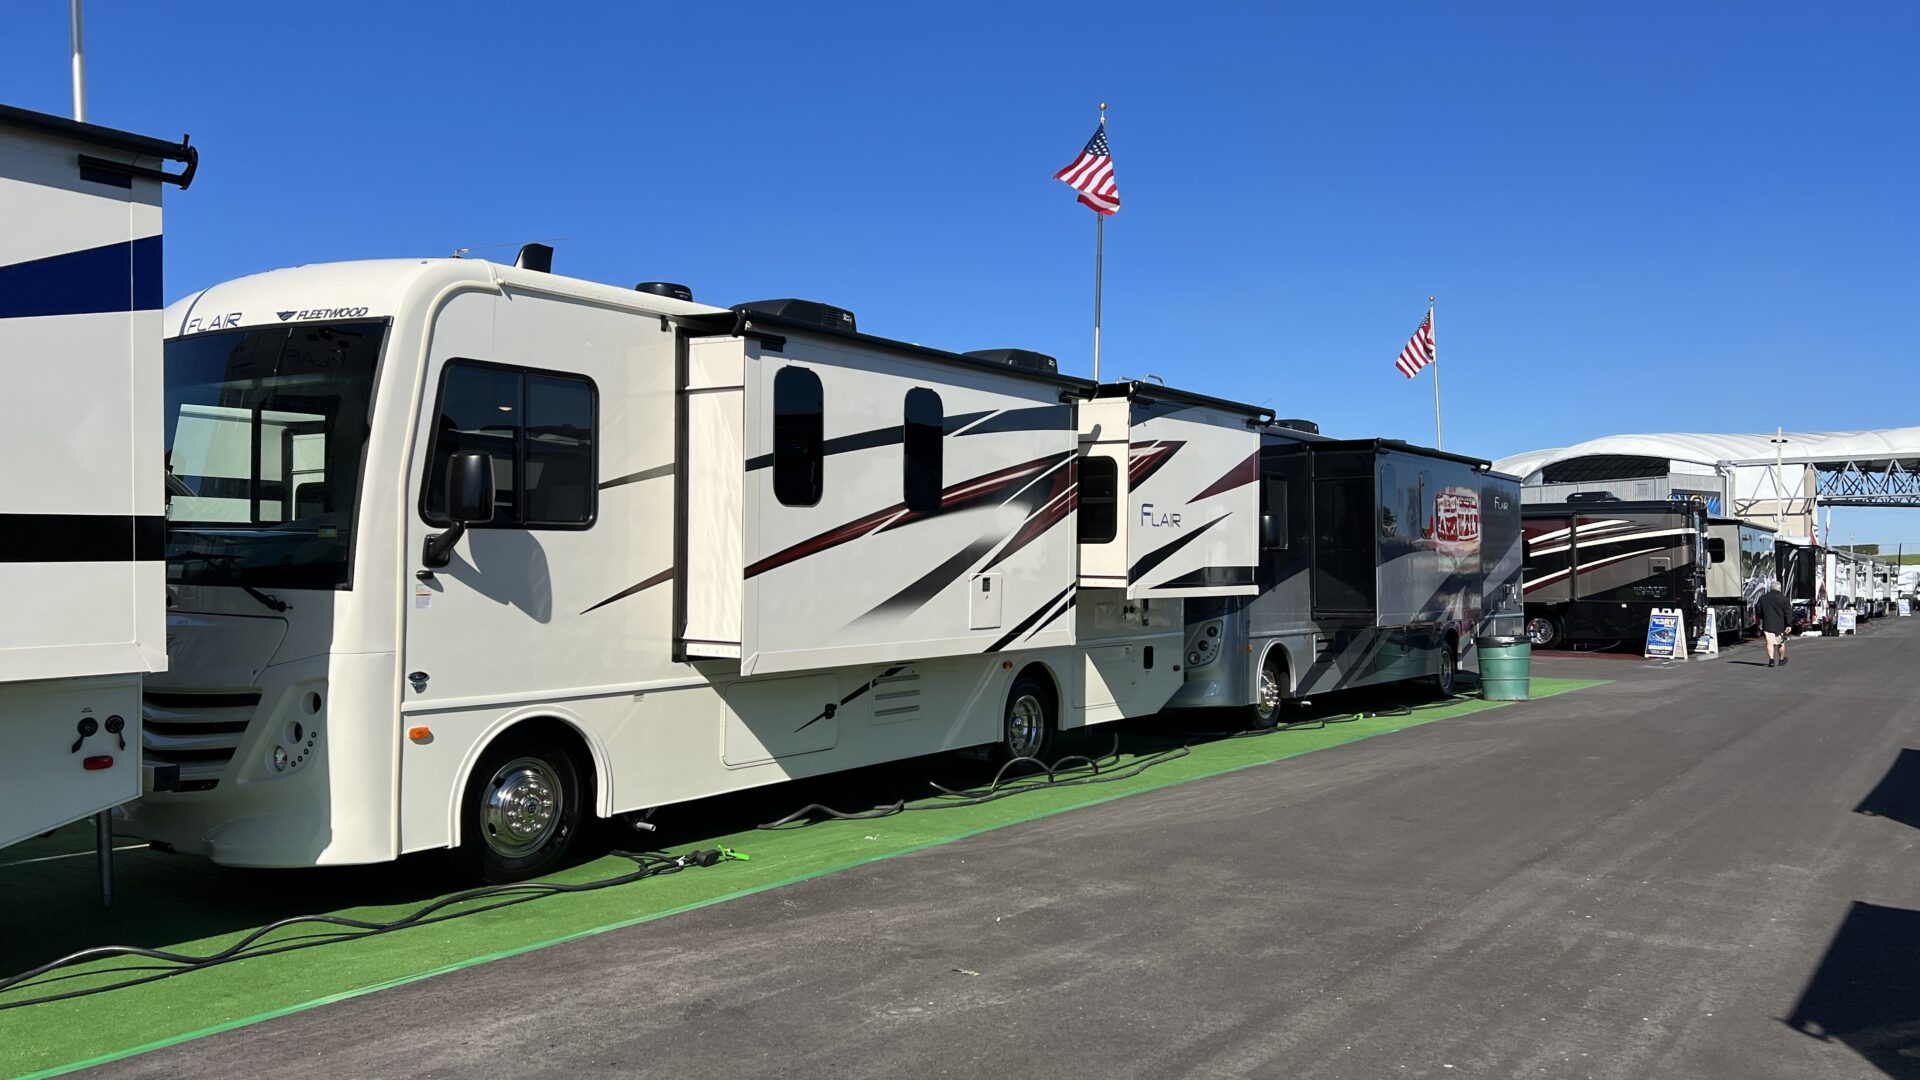 st louis rv and travel show 2022